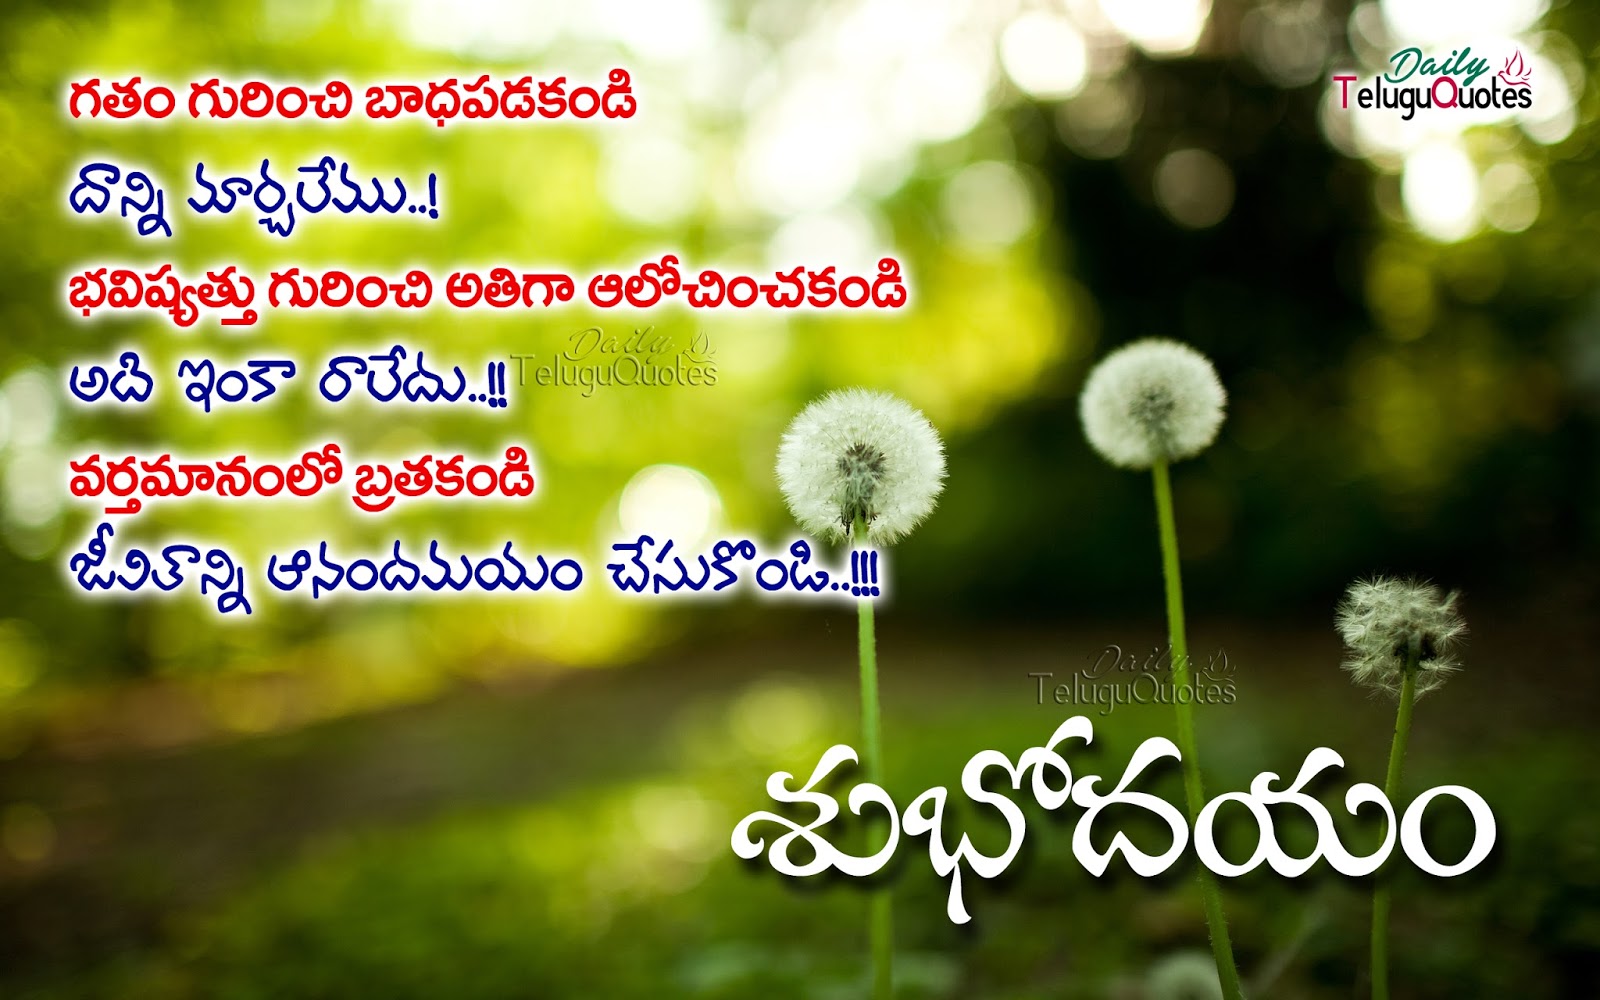 Good morning Telugu greetings with inspiring lines wishes